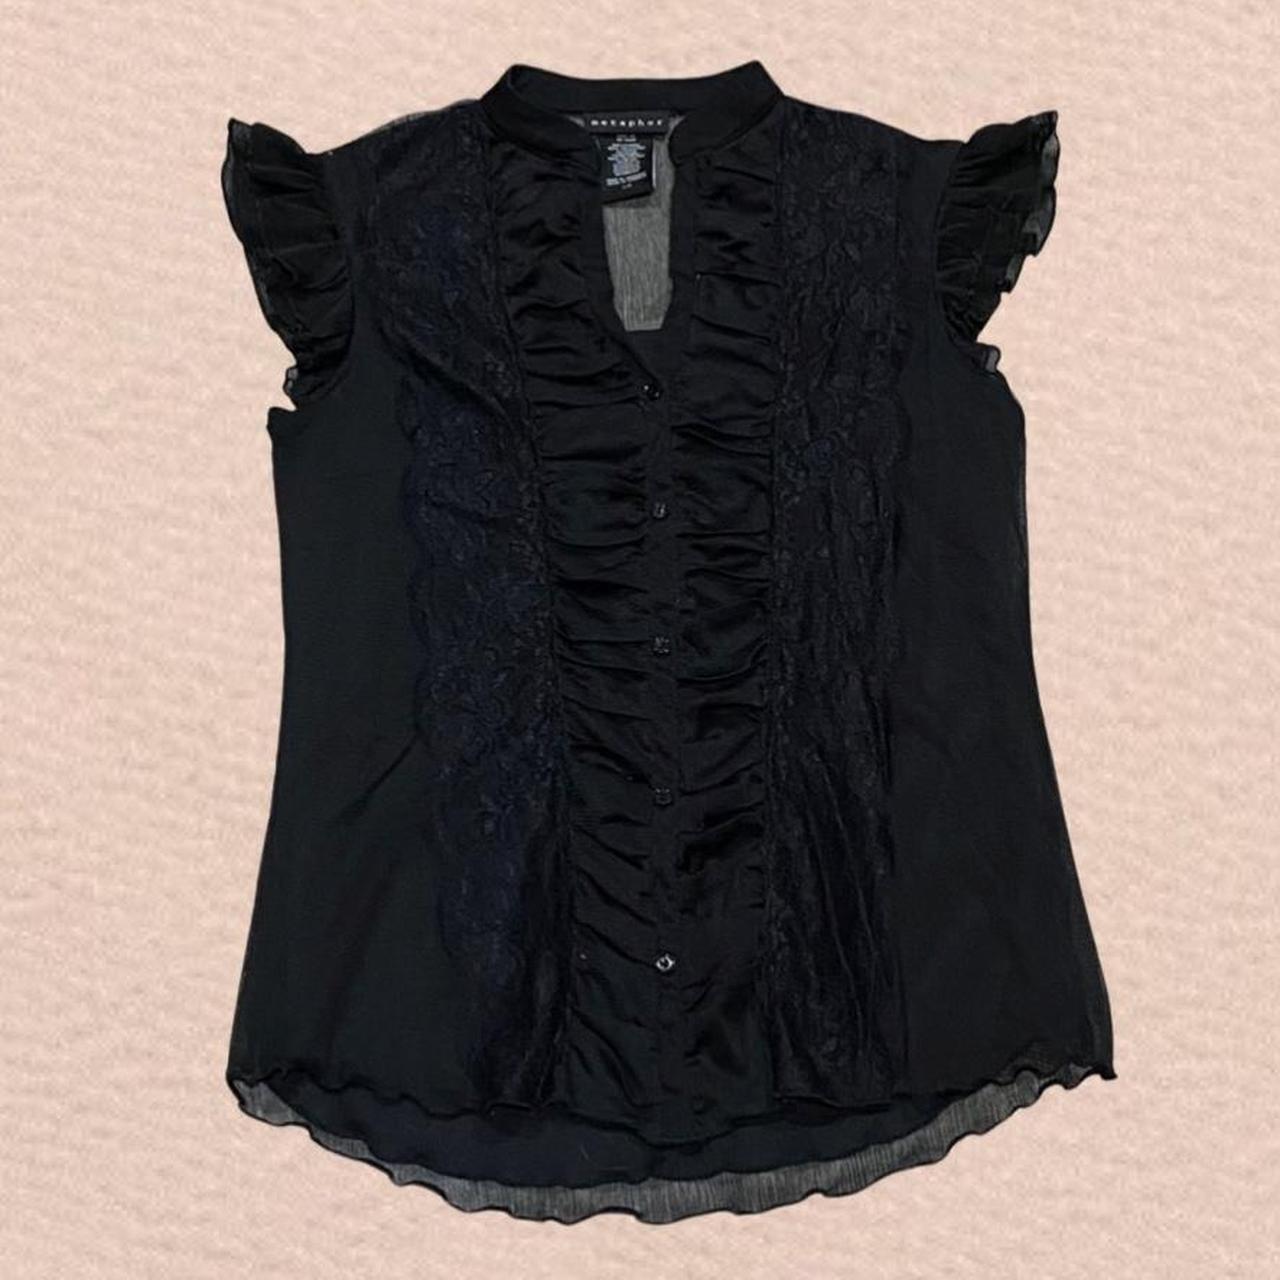 Product Image 1 - WHIMSIGOTH LACED BLOUSE 

CHEST: 17